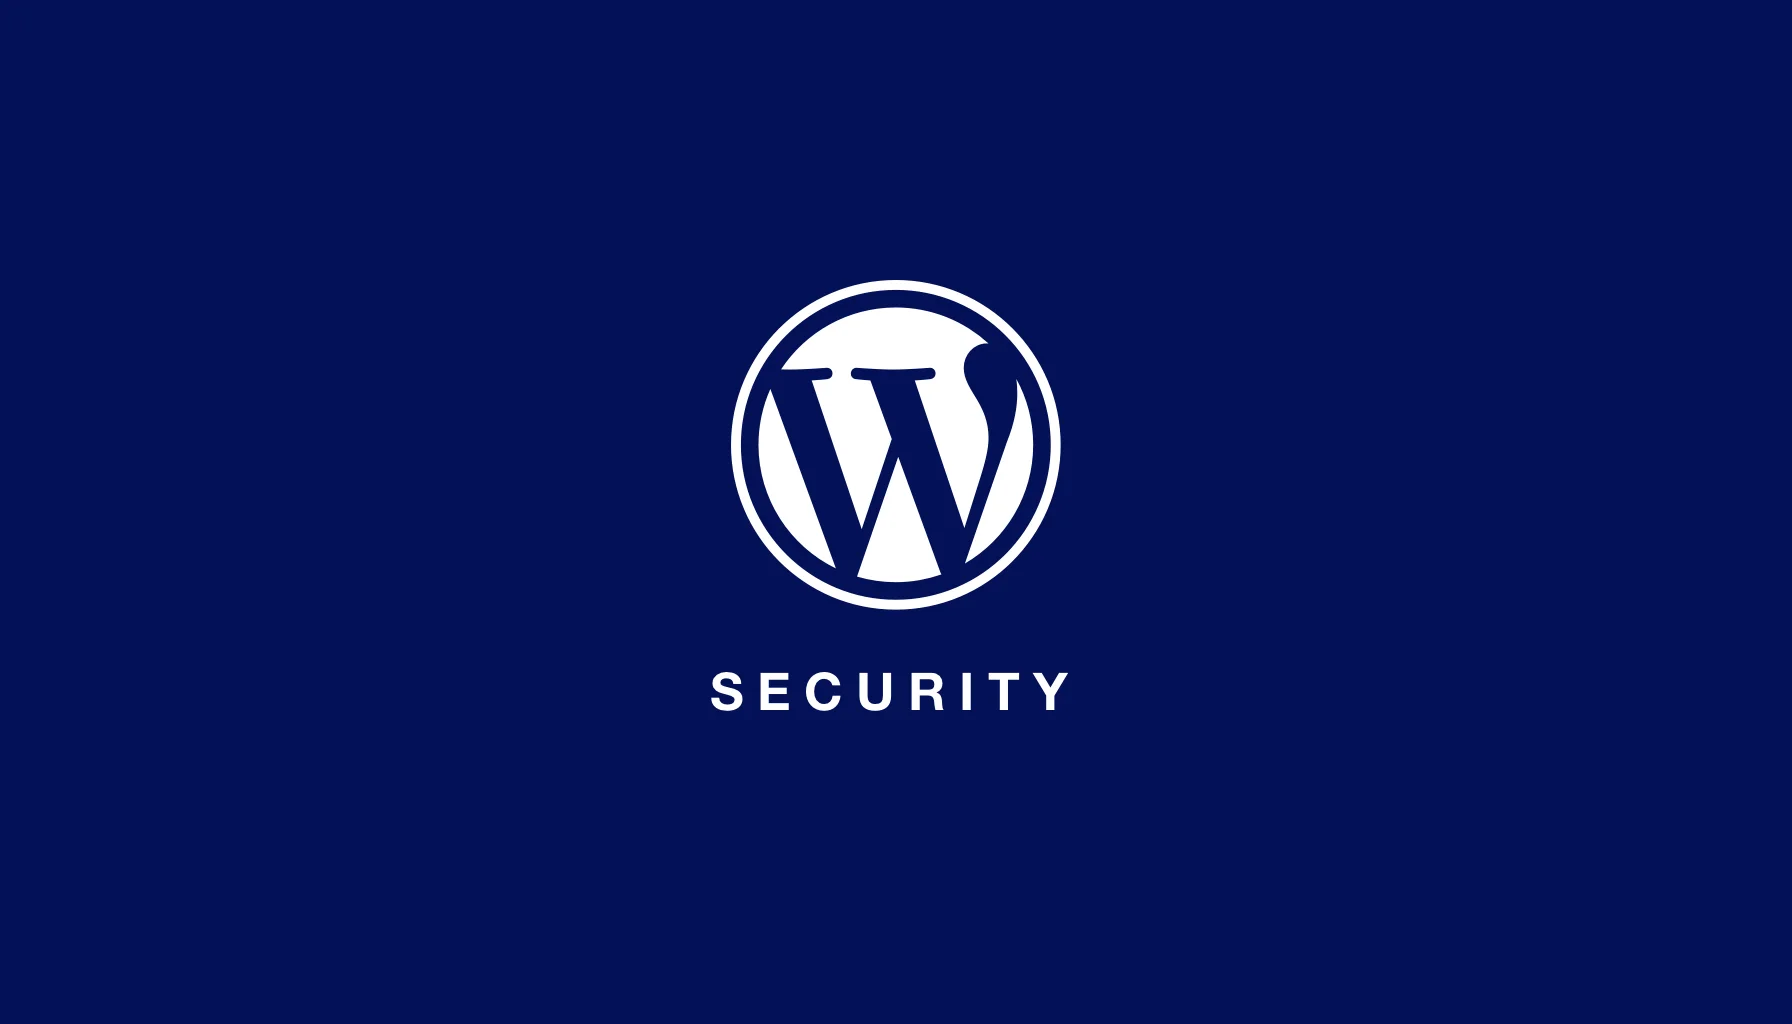 wp security by Hacker9